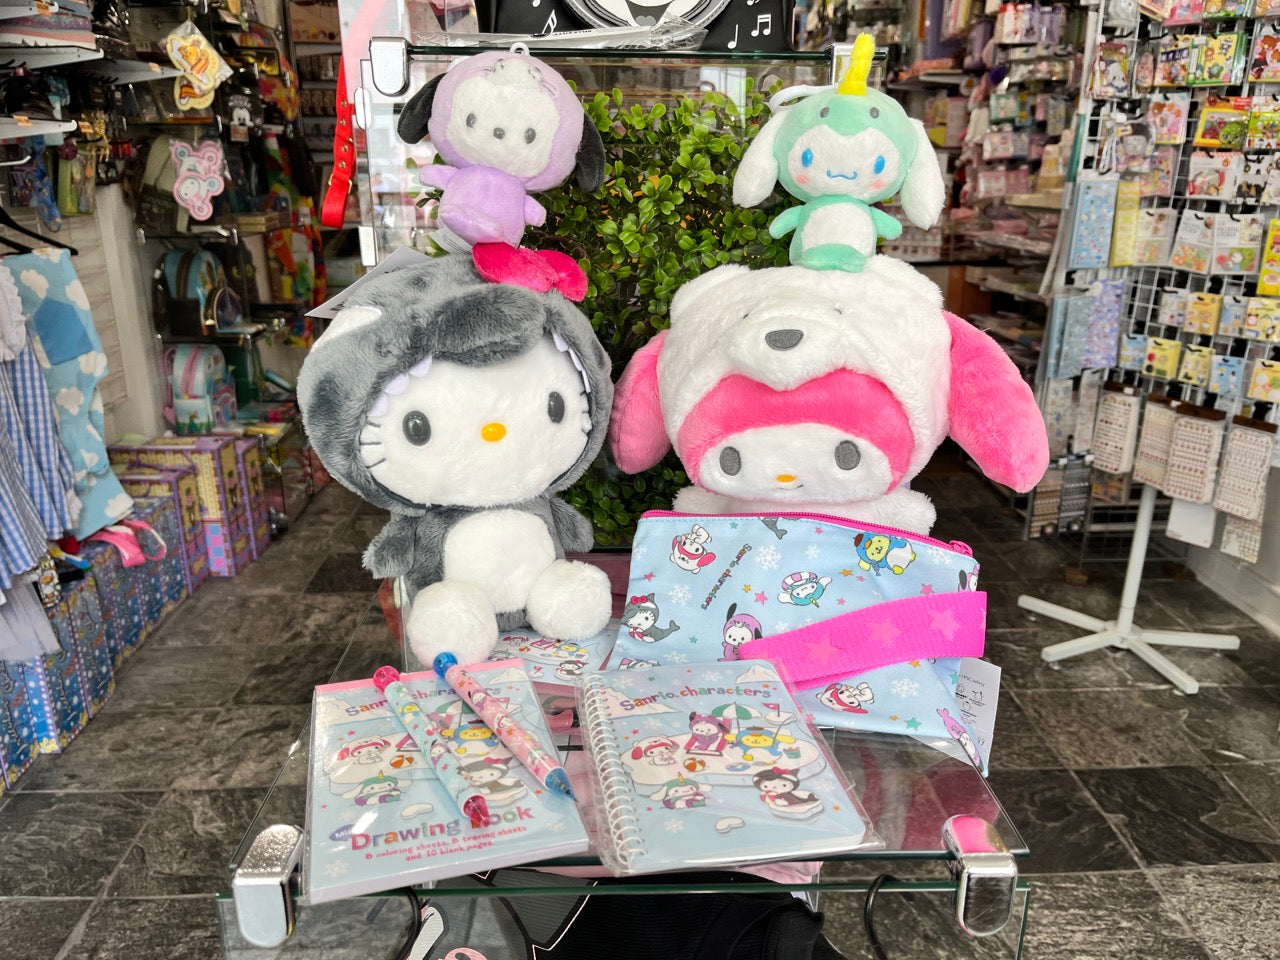 Go to The Beach with New Marine Hello Kitty & Friends